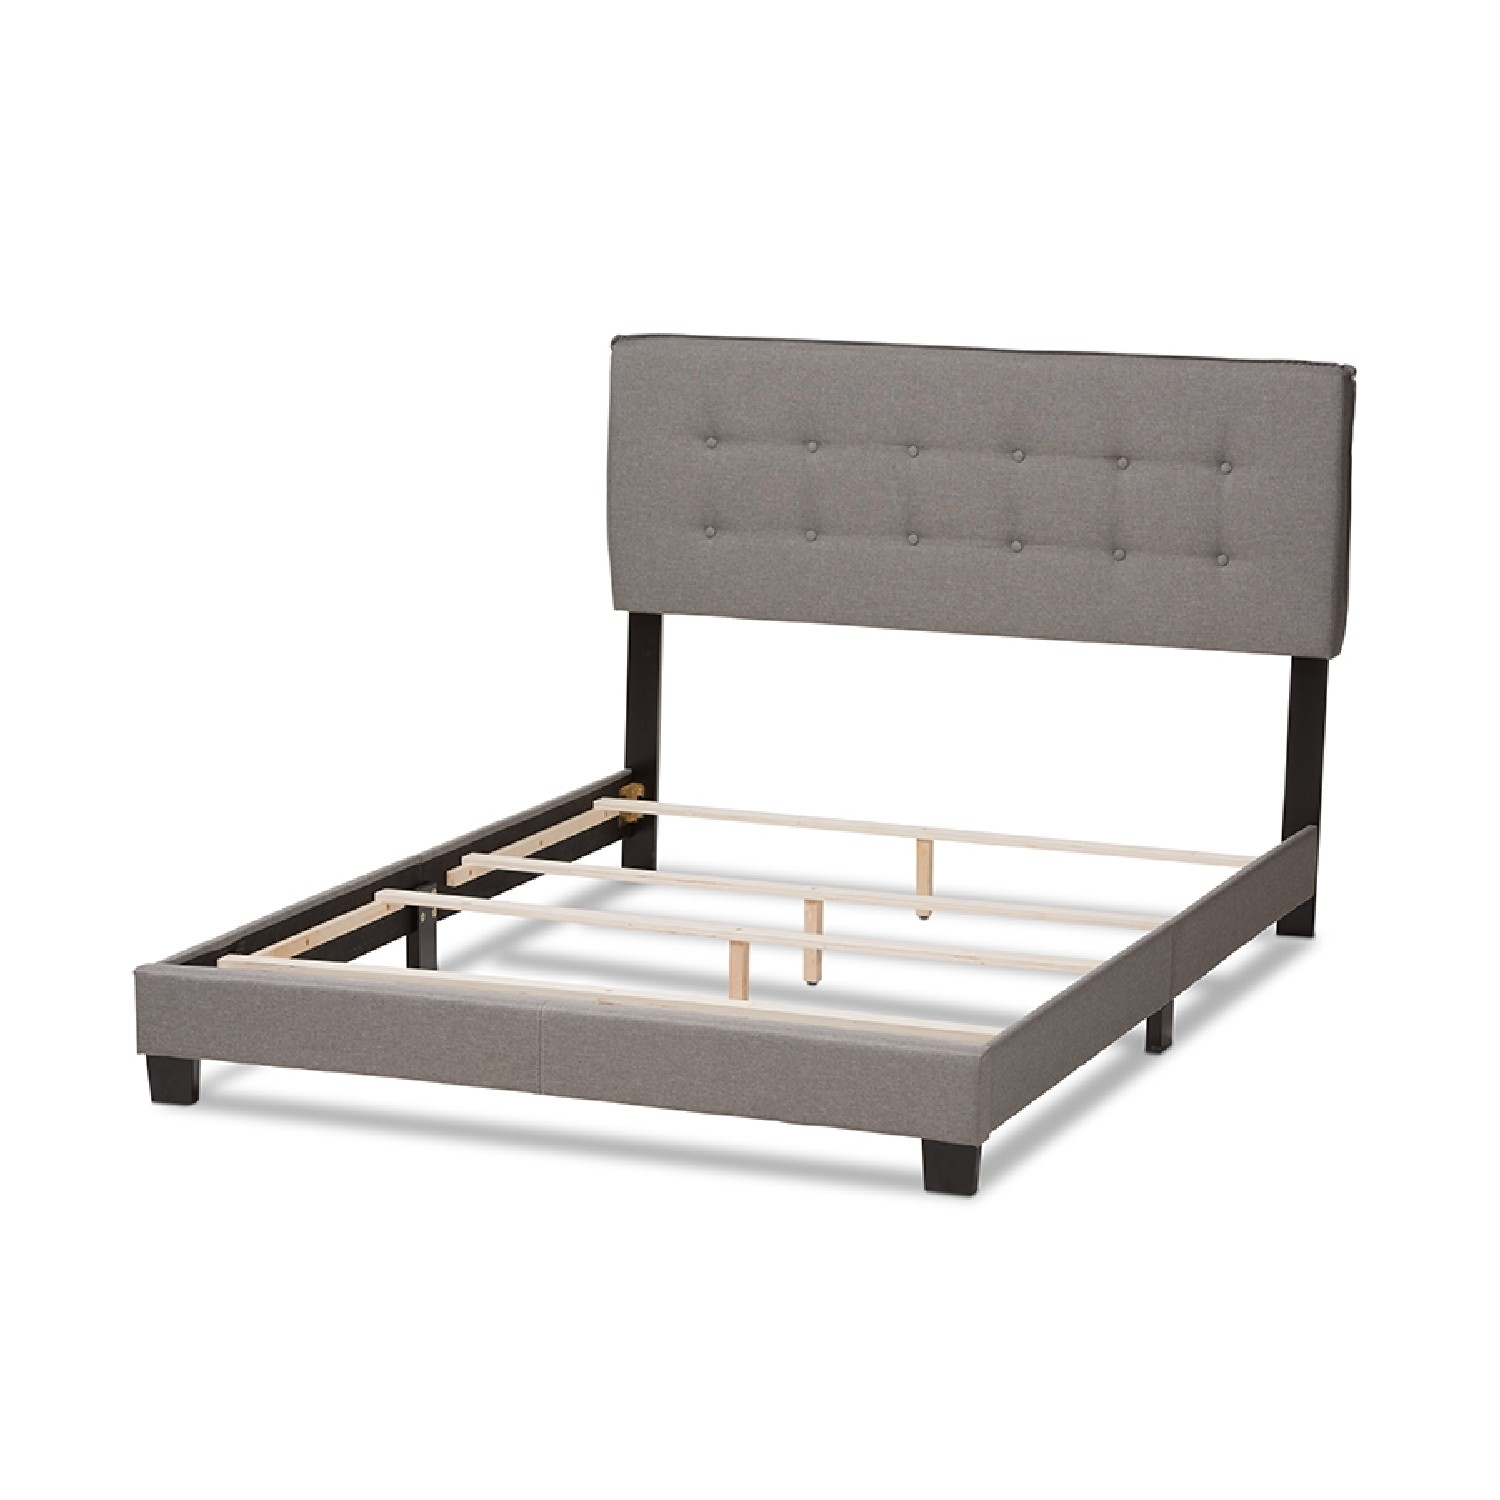 Baxton Studio Audrey Modern and Contemporary Upholstered Bed, Multiple Sizes, Multiple Colors - image 3 of 7